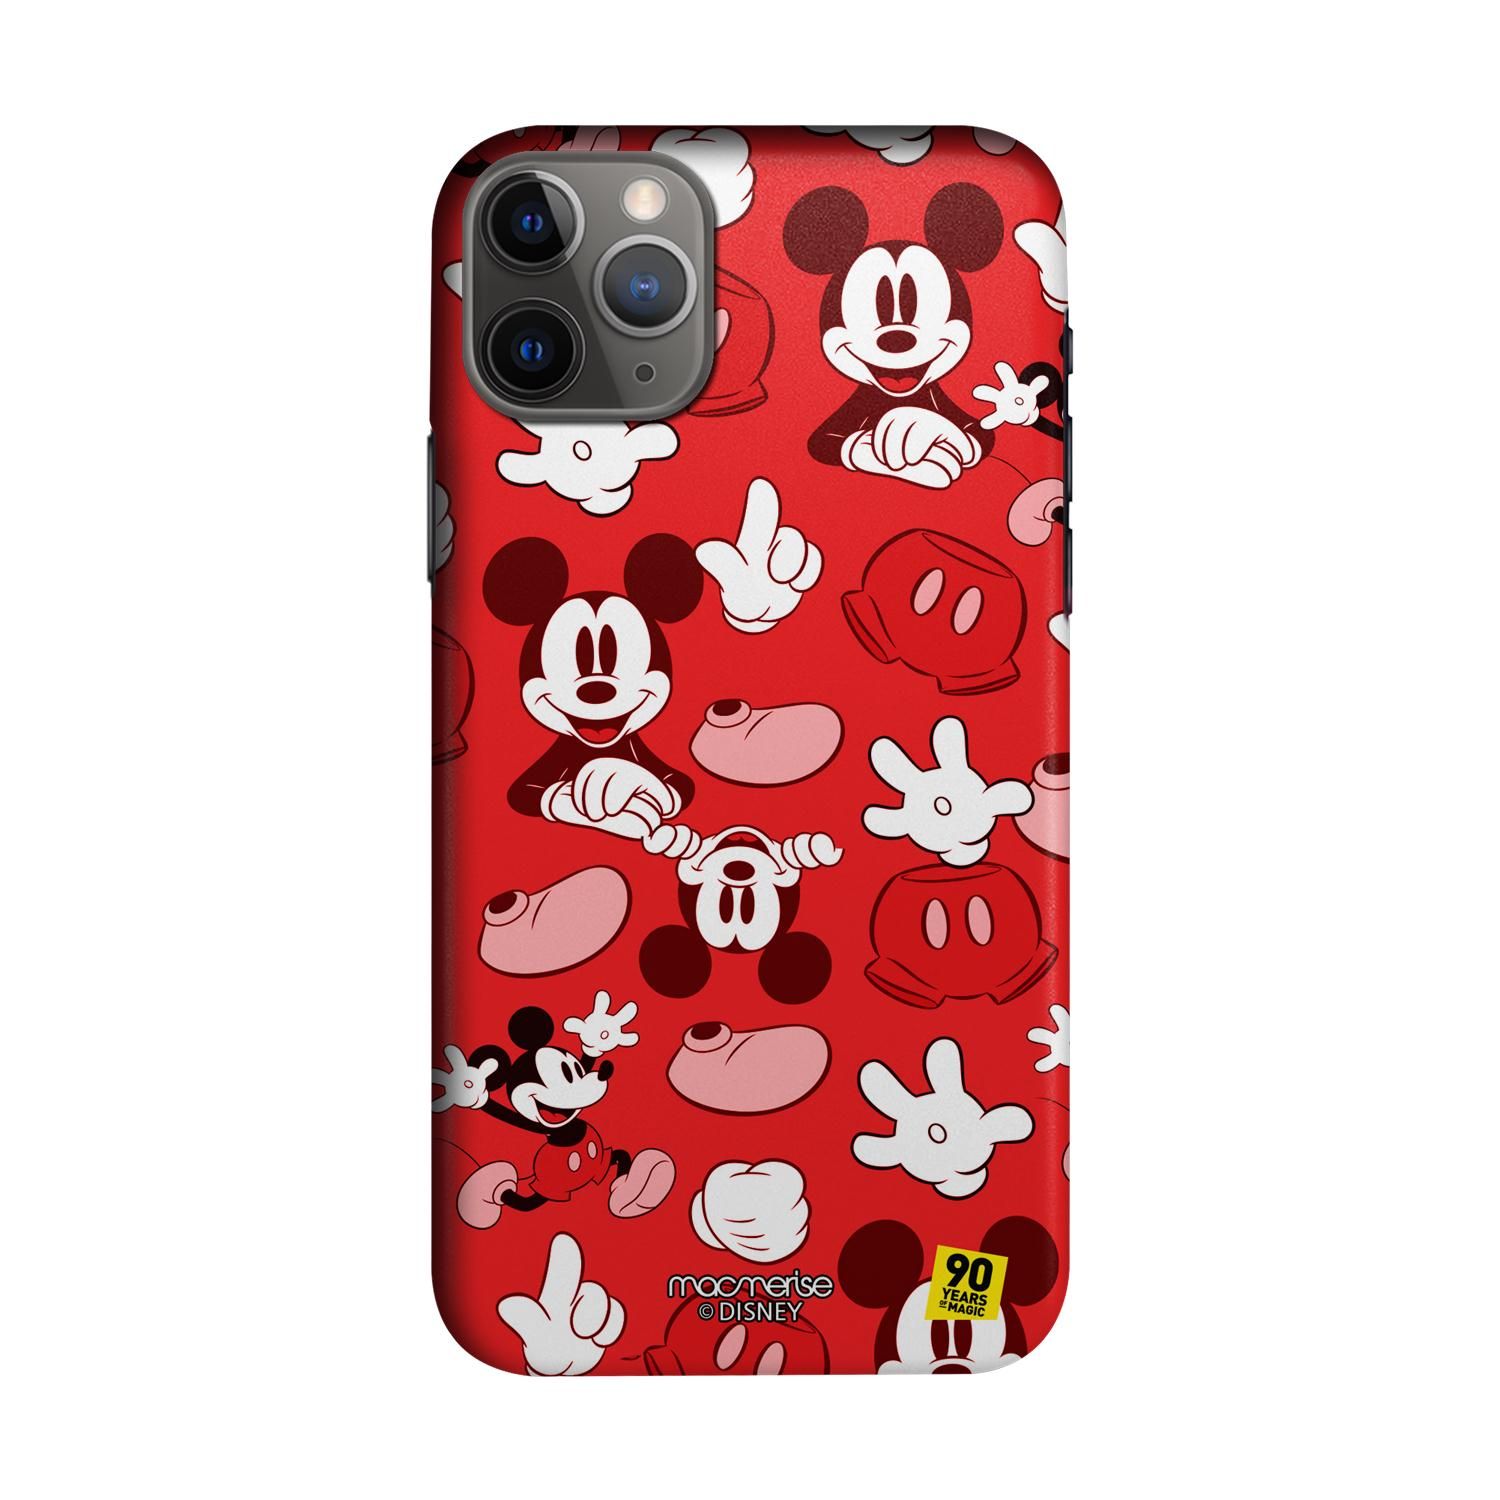 Buy Mickey classic Red - Sleek Phone Case for iPhone 11 Pro Max Online